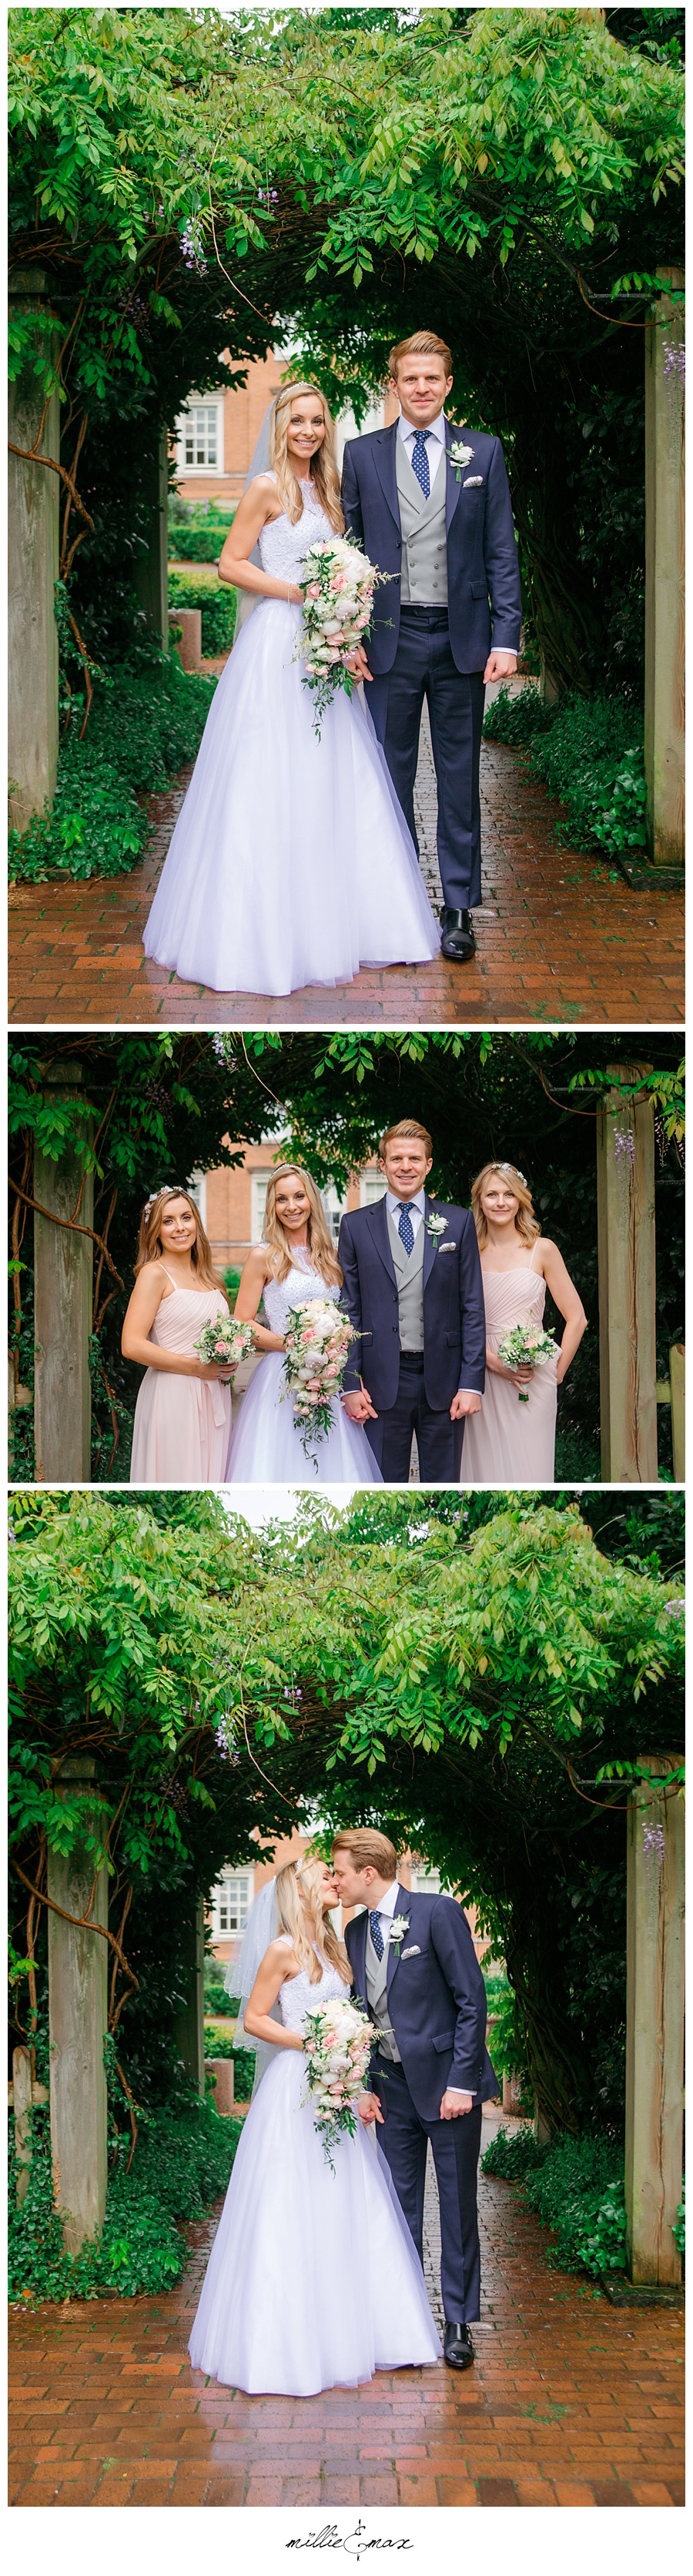 Becky-and-Neil-Cisswood-House-Horsham-Registry-Park-House-South-Lodge-Wedding-Photography-Horsham-West-Sussex-Millie-And-Max